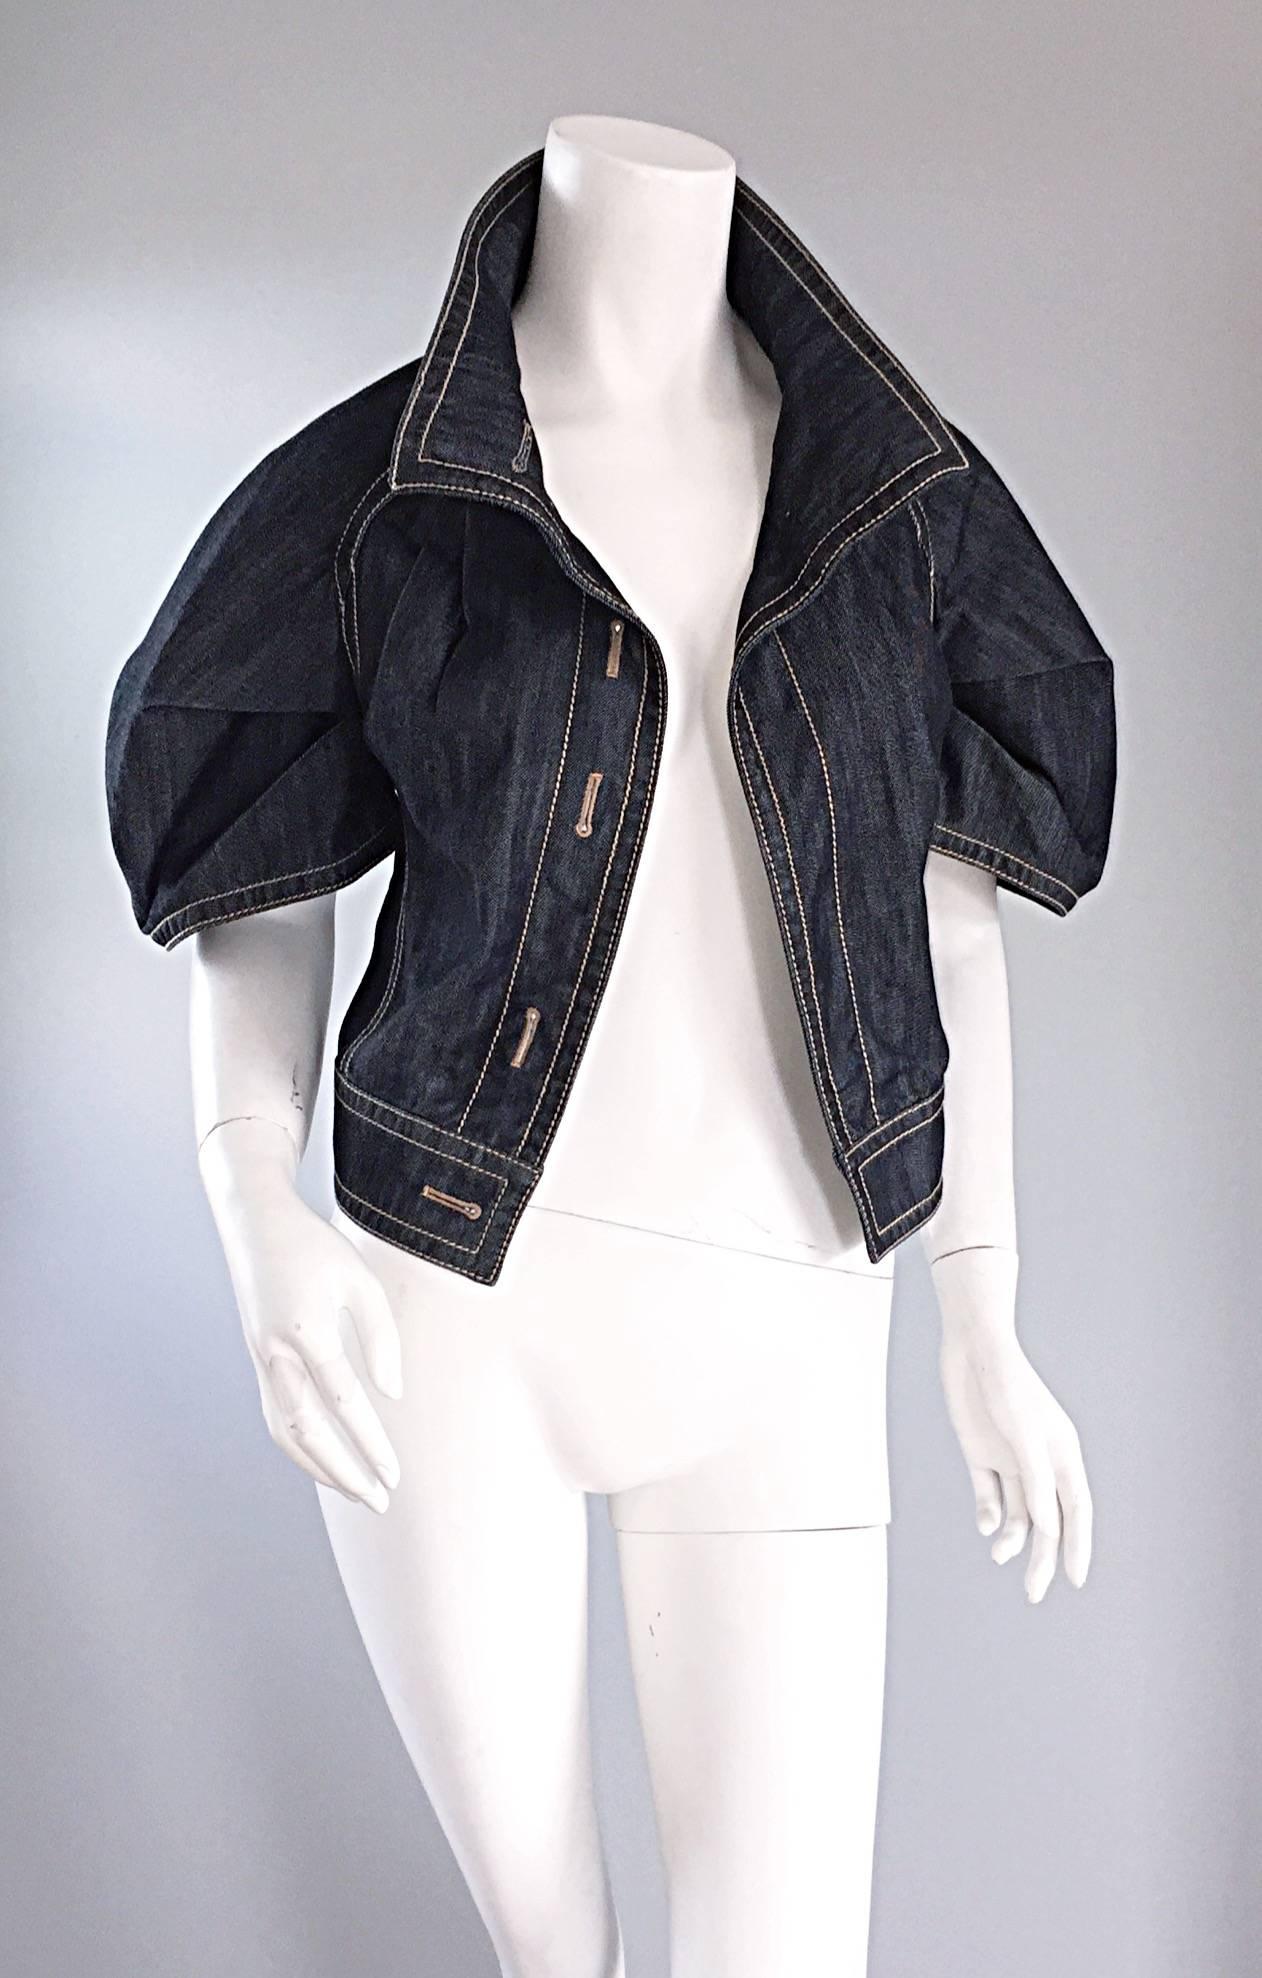 Chic Early 2000s ESCADA short sleeve denim jacket! Features origami-like pleating detail at sleeves, with mock button holes down front bodice. Elegant, with a slight edge. I love the look of this paired with a long sleeve turtleneck, or over a